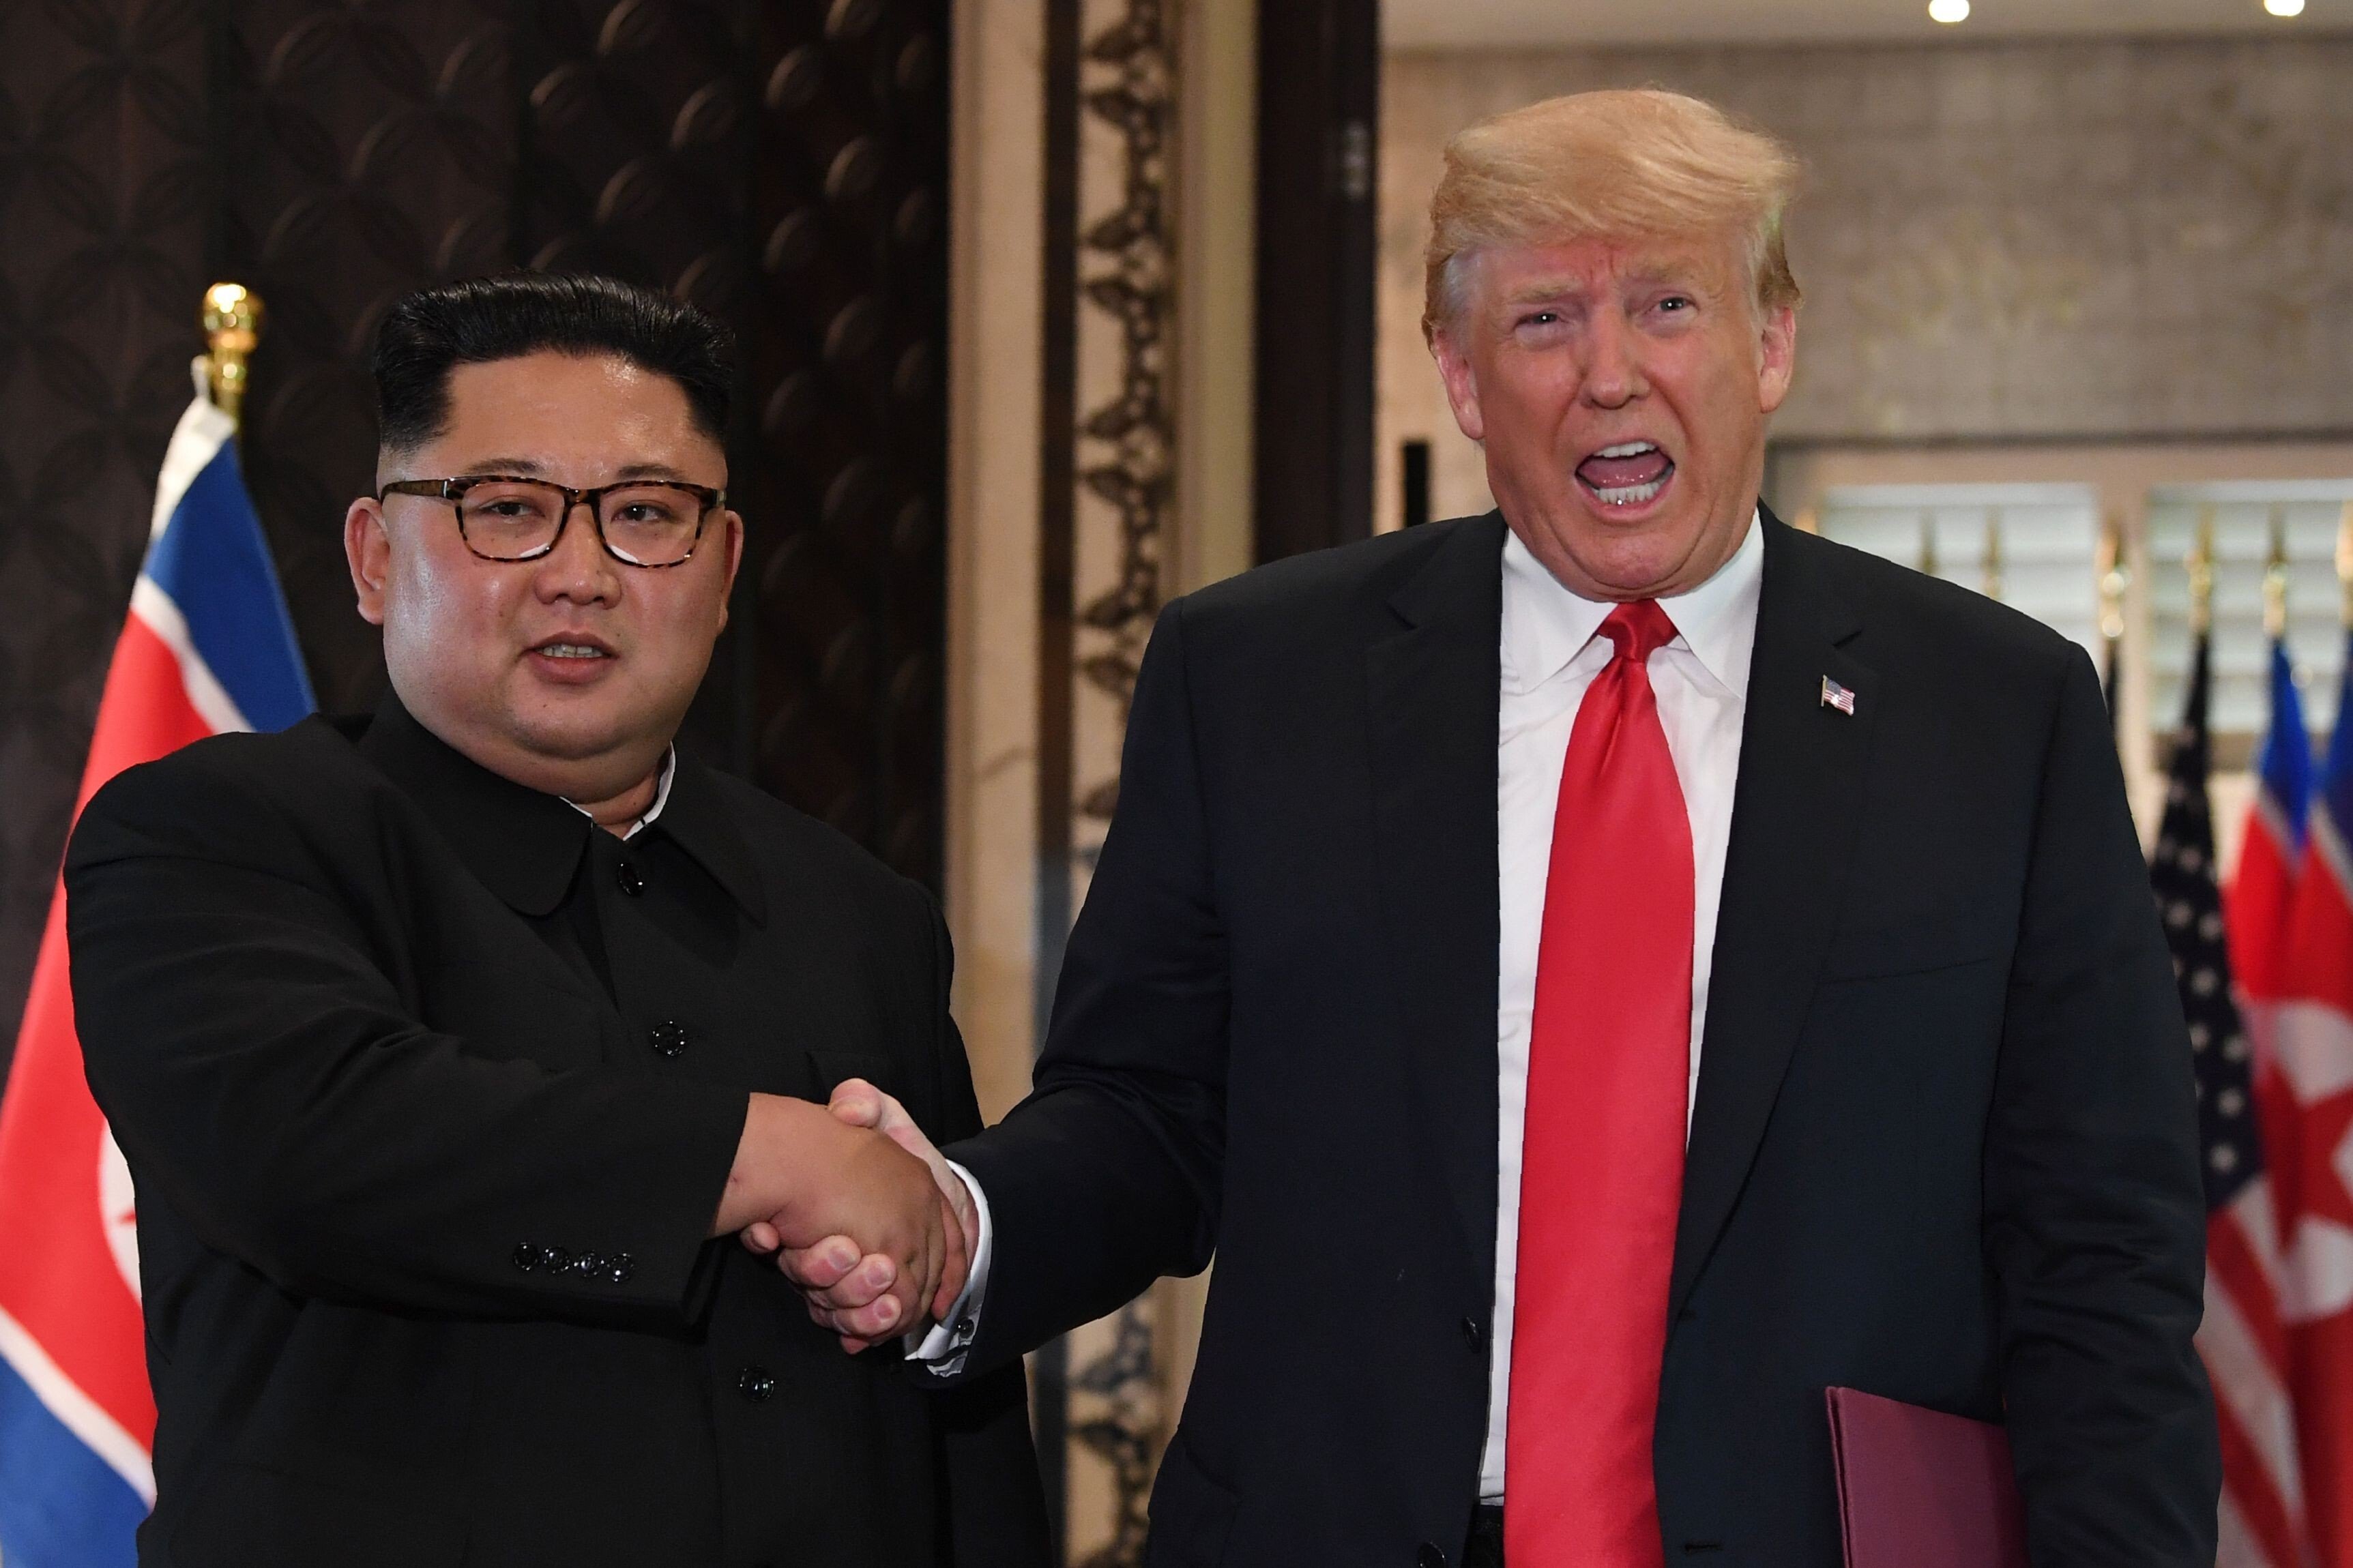 North Korean leader Kim Jong-un shakes hands with US President Donald Trump in Singapore on June 12, 2018. File photo: AFP